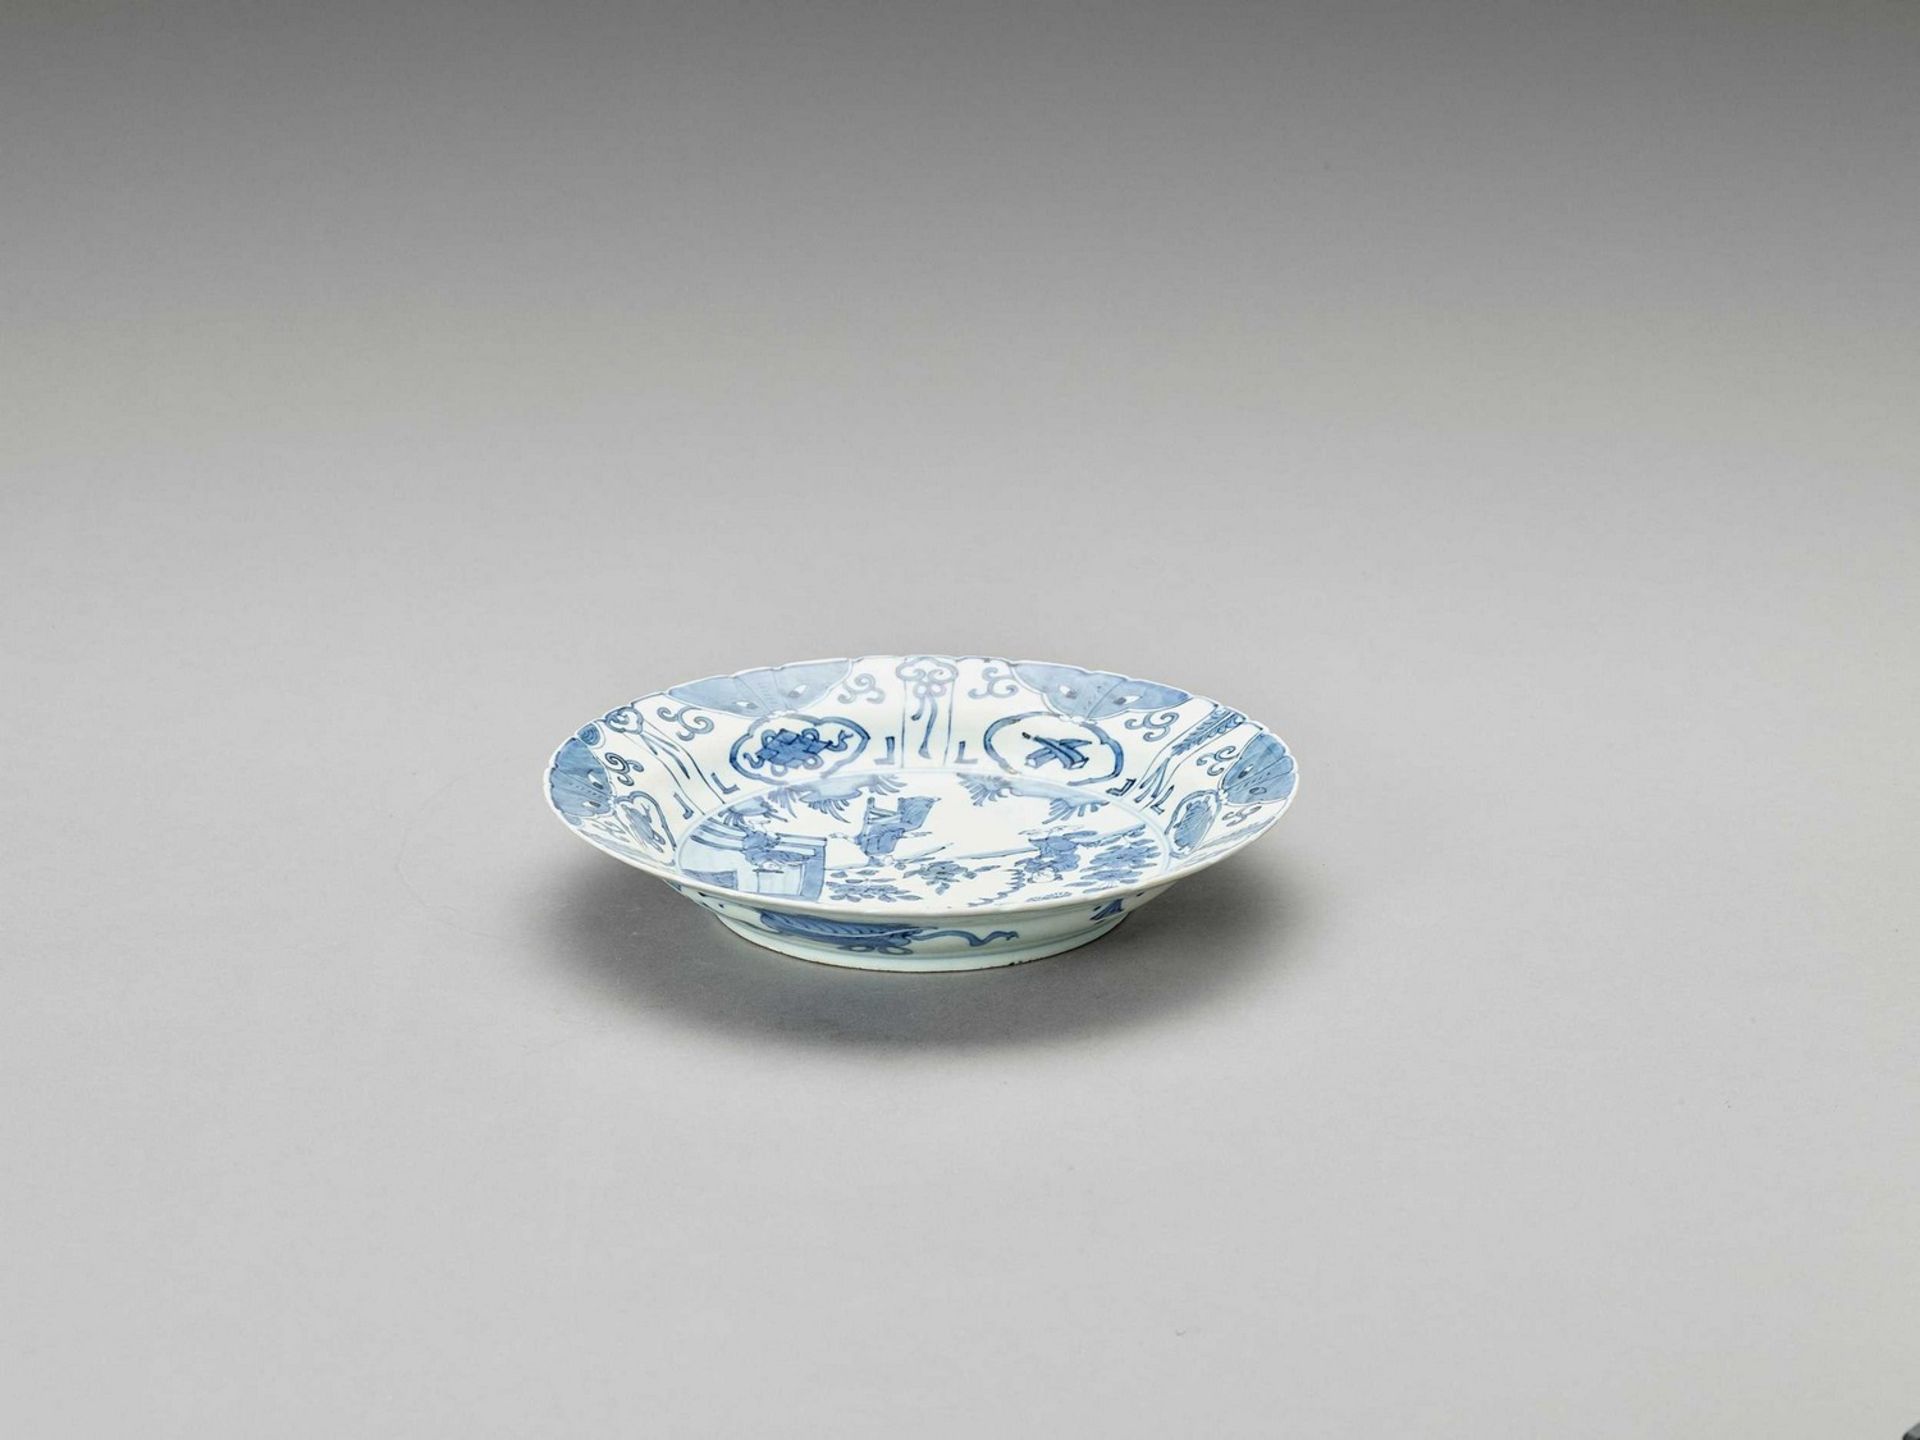 A RARE BLUE AND WHITE PORCELAIN DISH - Image 2 of 4